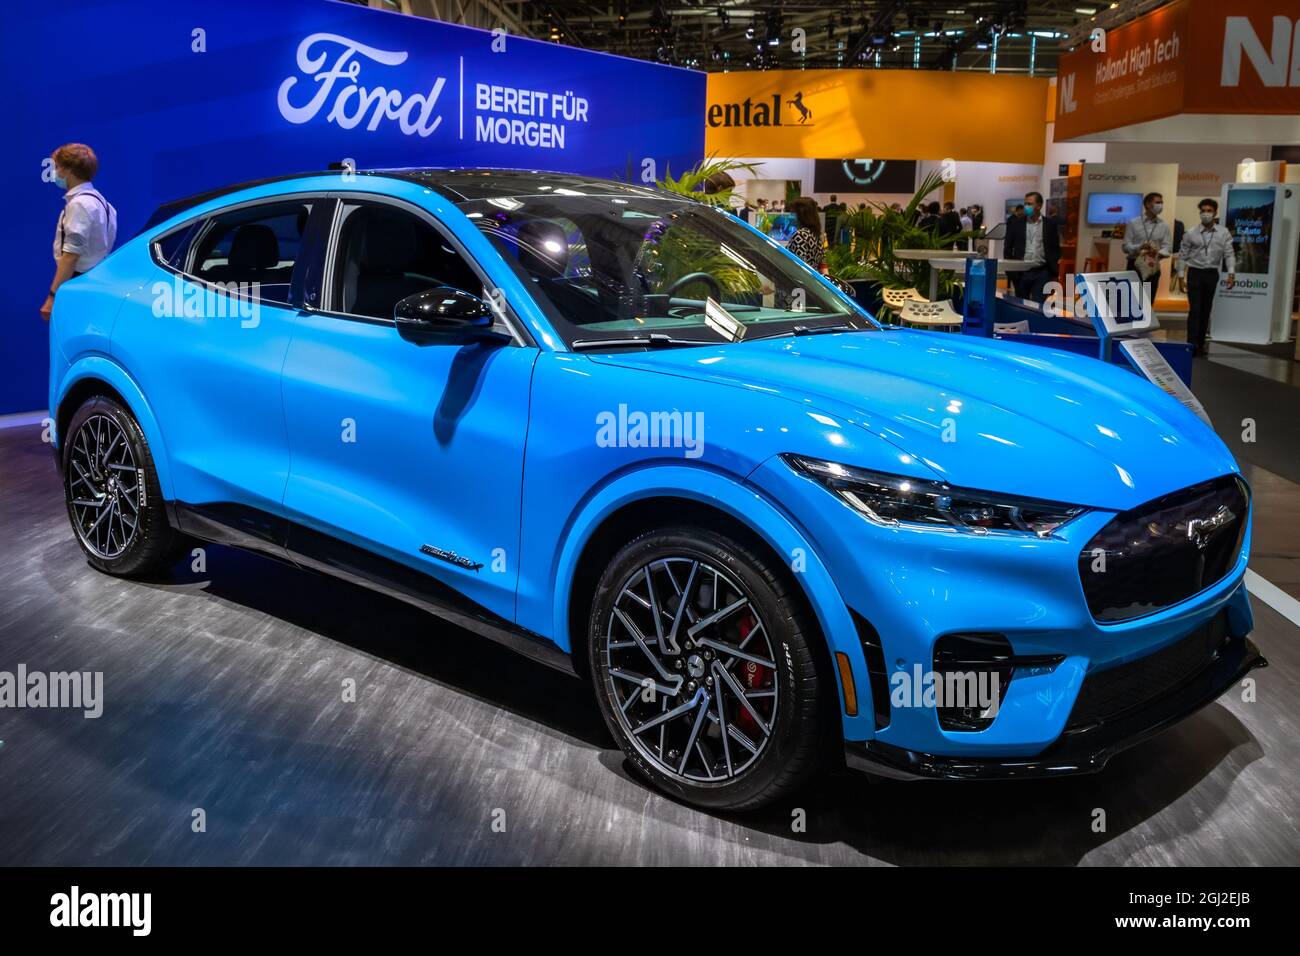 Ford Mustang Mach-E GT electric SUV car showcased at the IAA Mobility 2021 motor show in Munich, Germany - September 6, 2021. Stock Photo